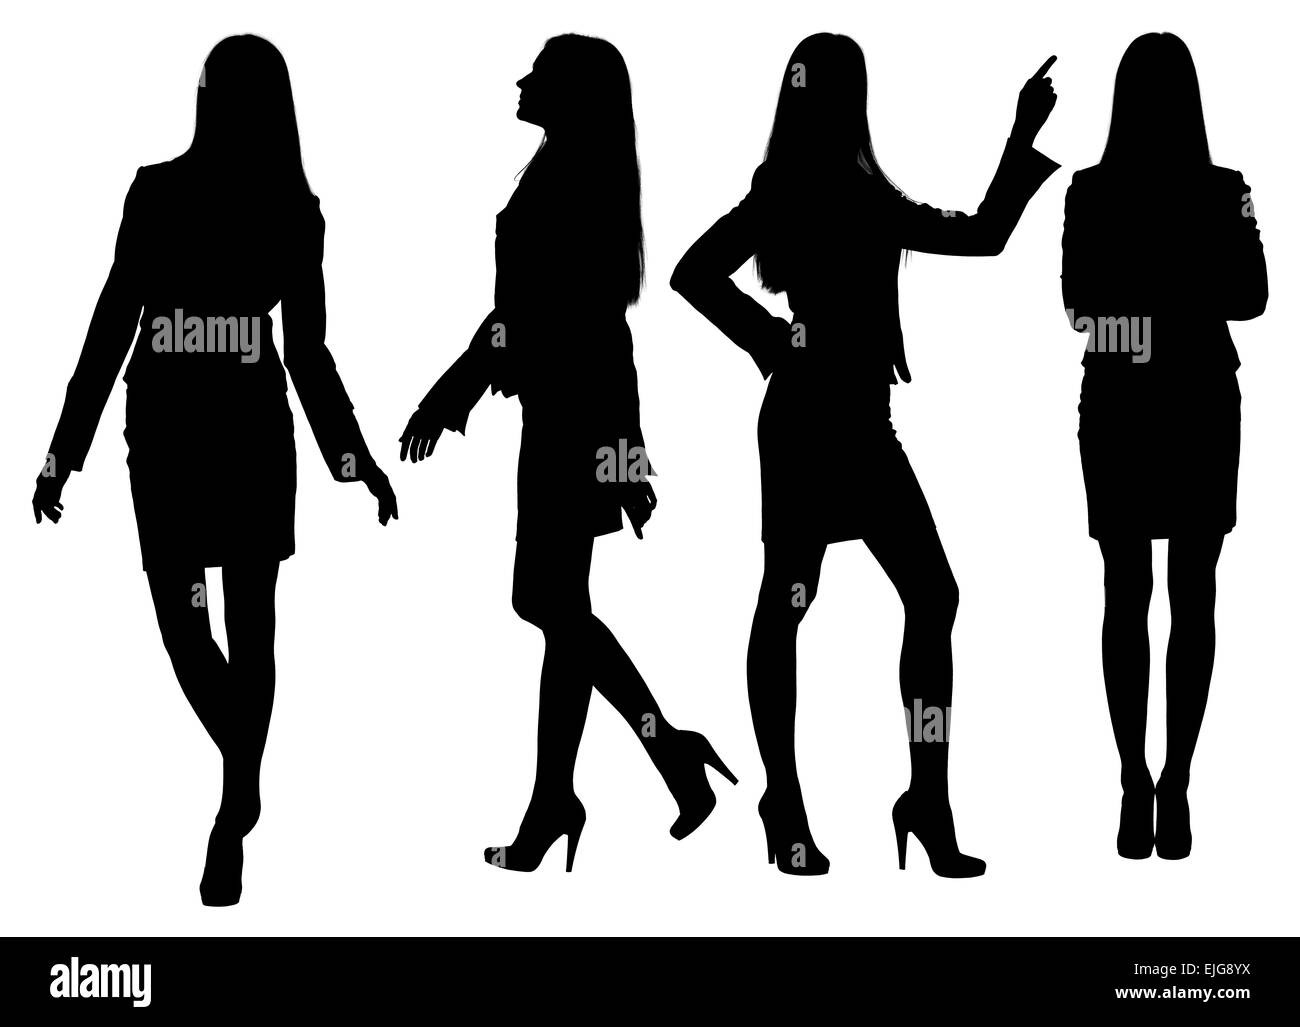 Business woman standing silhouette Stock Photo